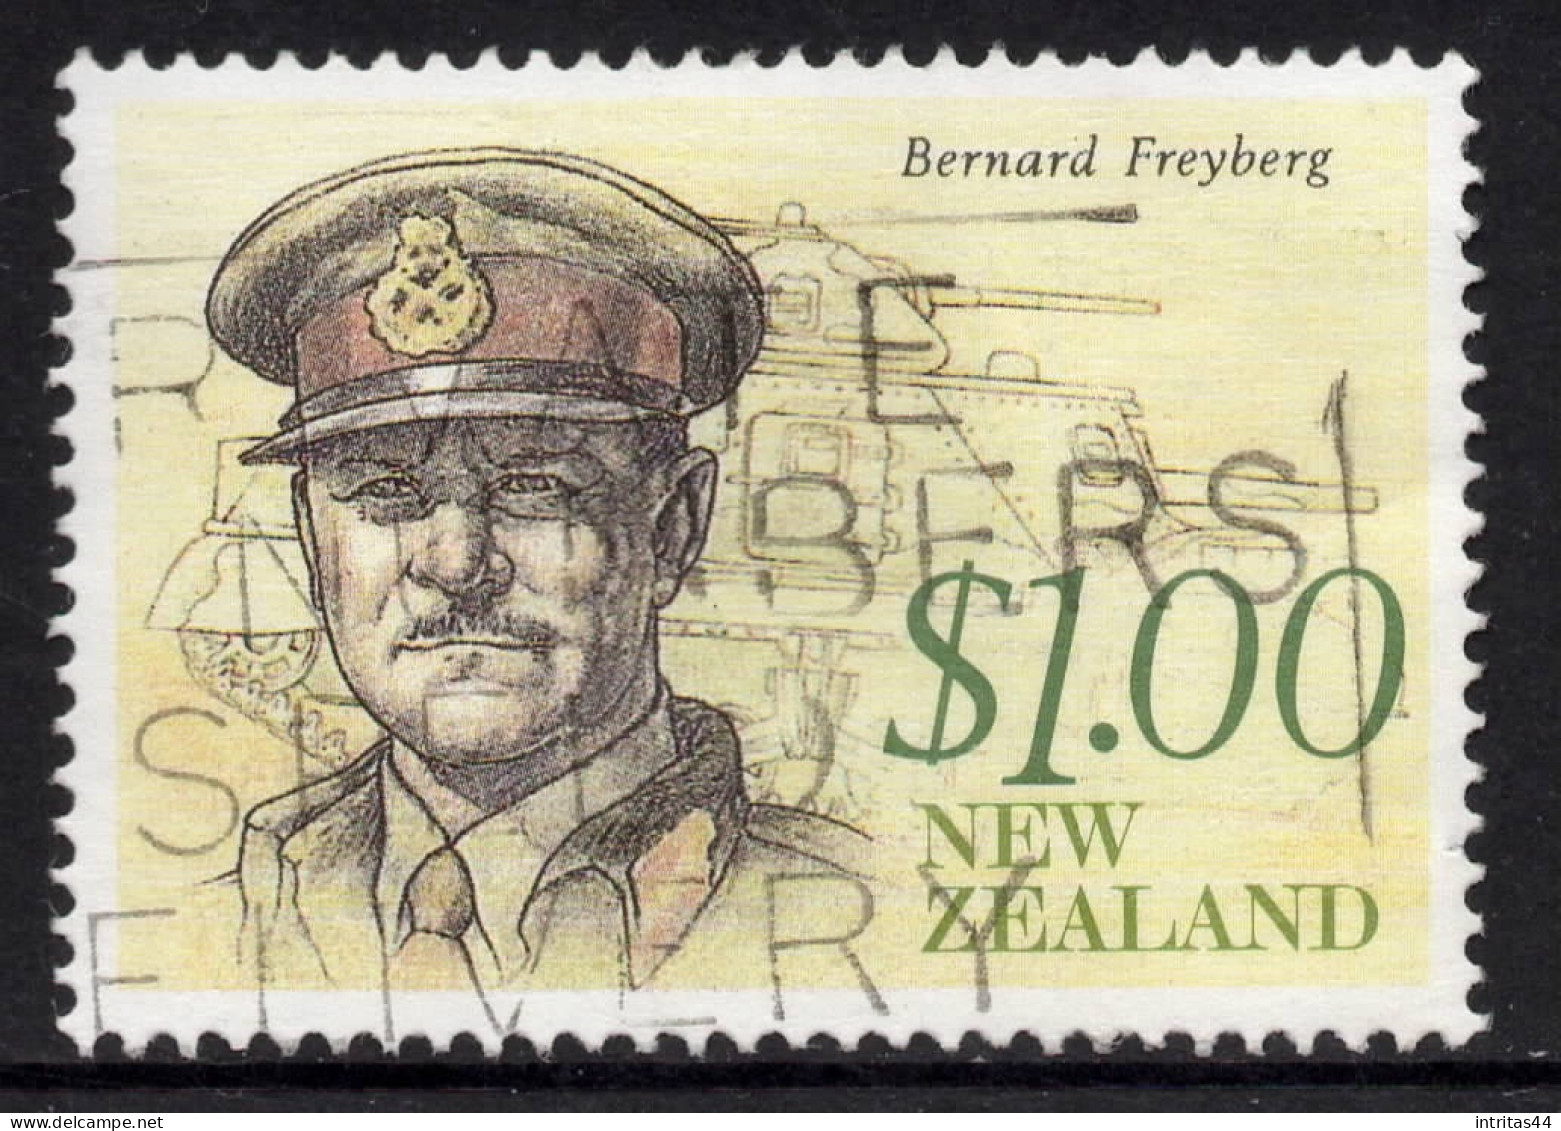 NEW ZEALAND 1990 HERITAGE-THE ACHIEVERS  $1.00 " FREYBERG "  STAMP VFU - Used Stamps